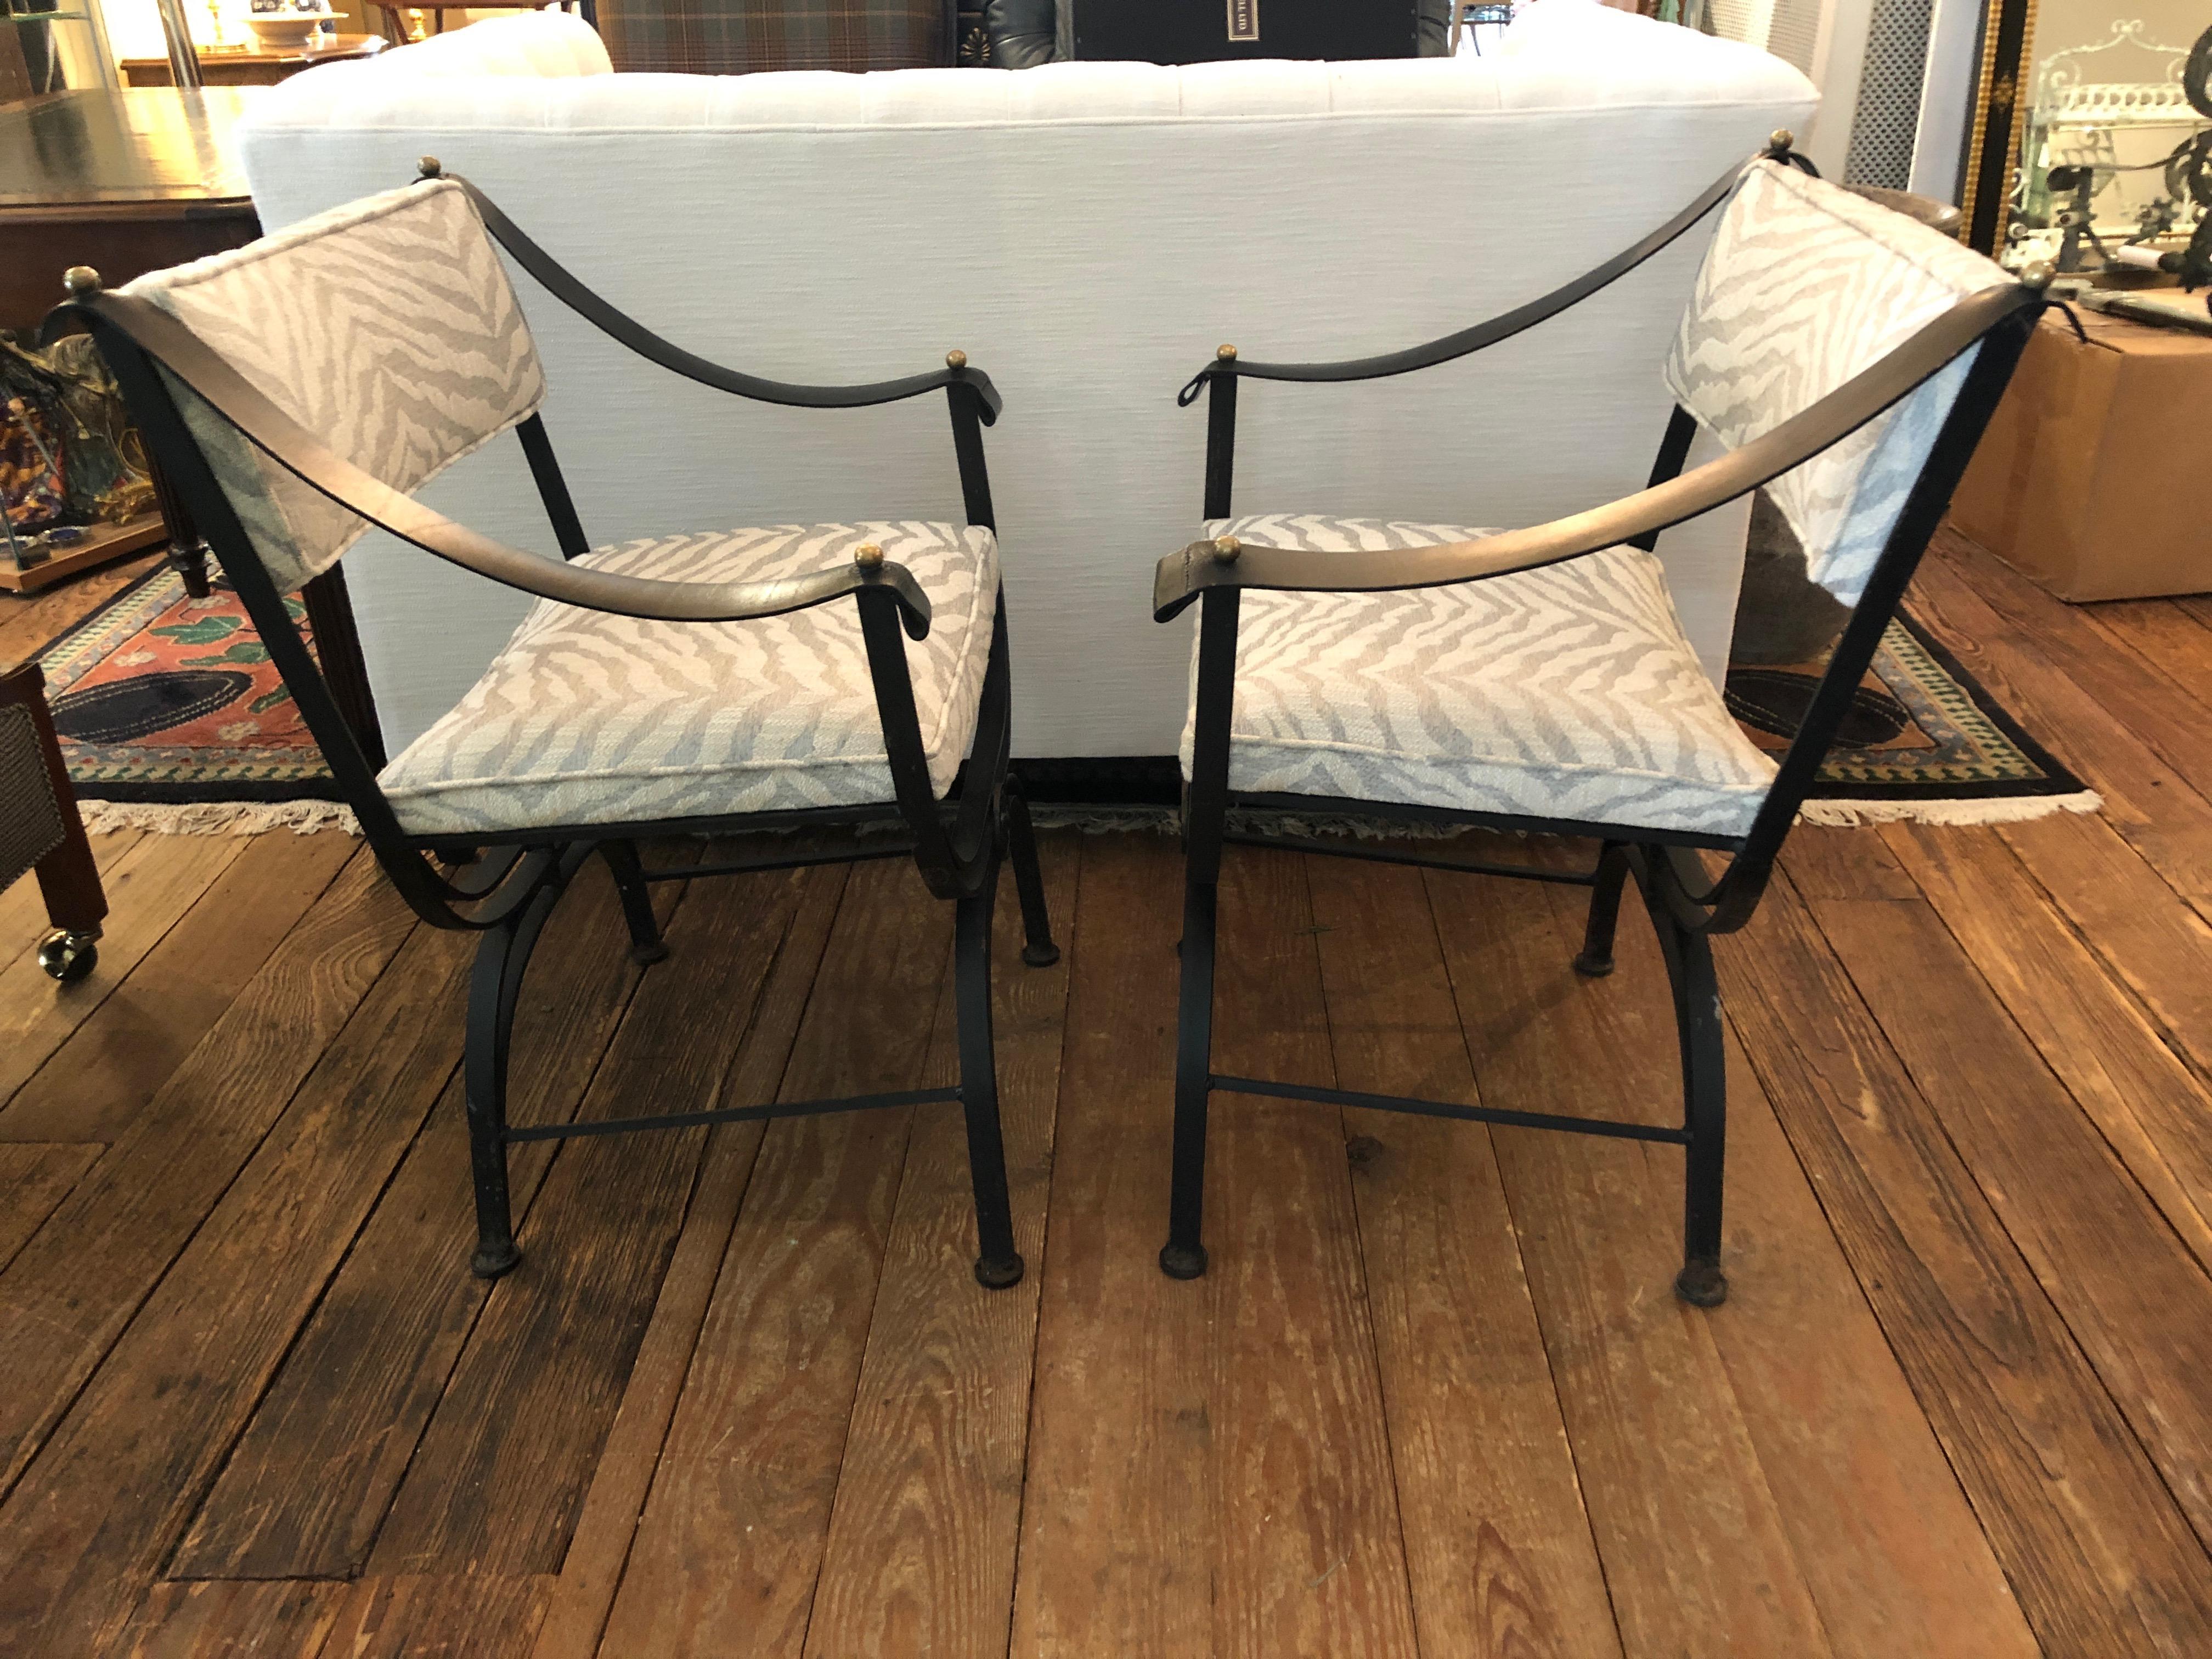 Sensational Pair of Campaign Style Wrought Iron Club Chairs with Leather Arms 4